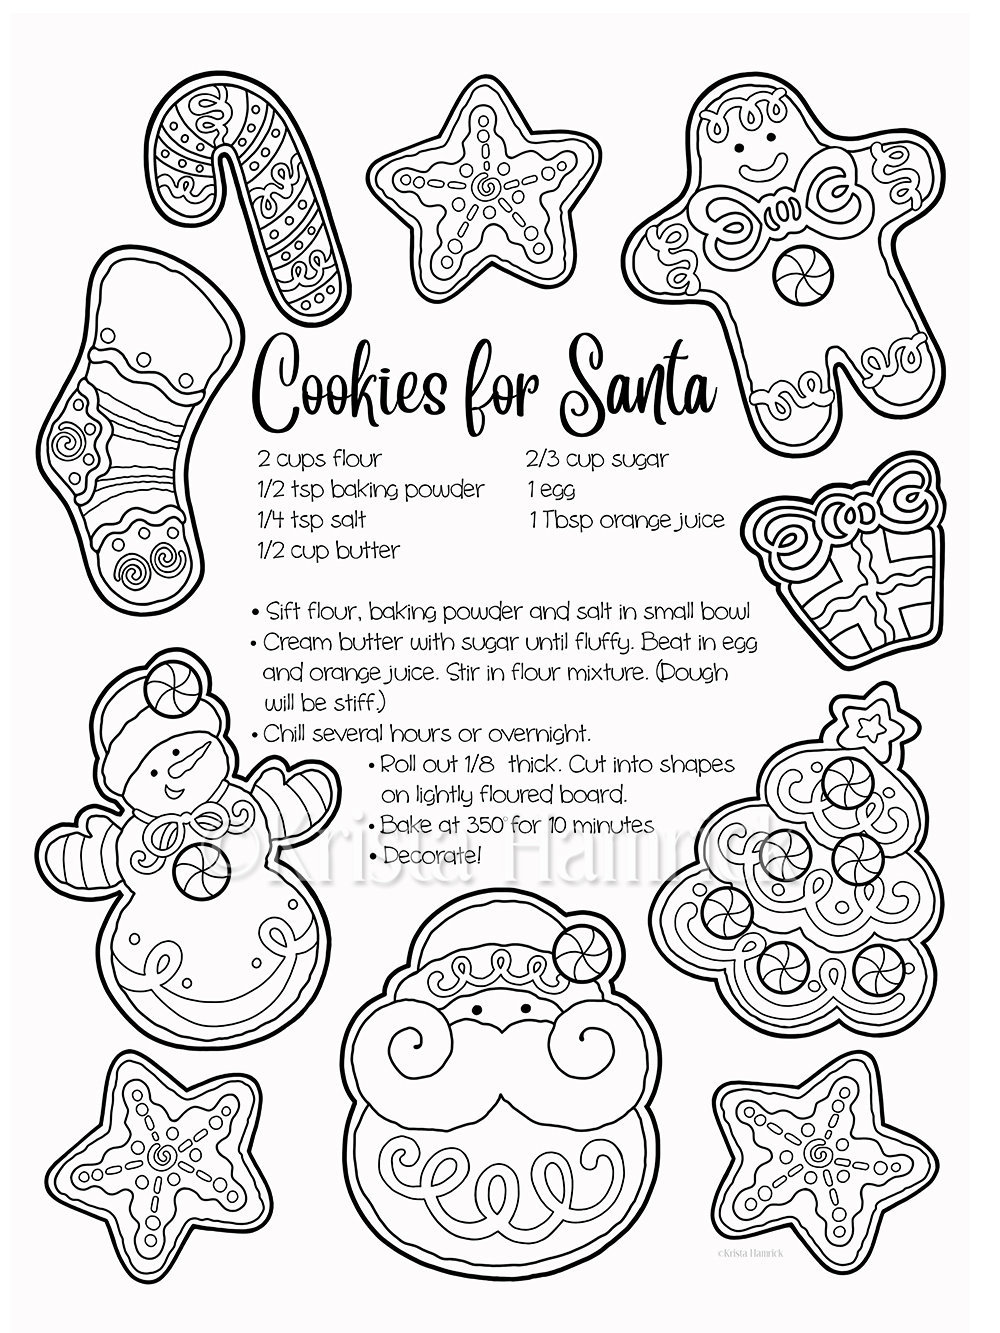 Christmas Cookies Coloring Pages - 25 FREE Pages